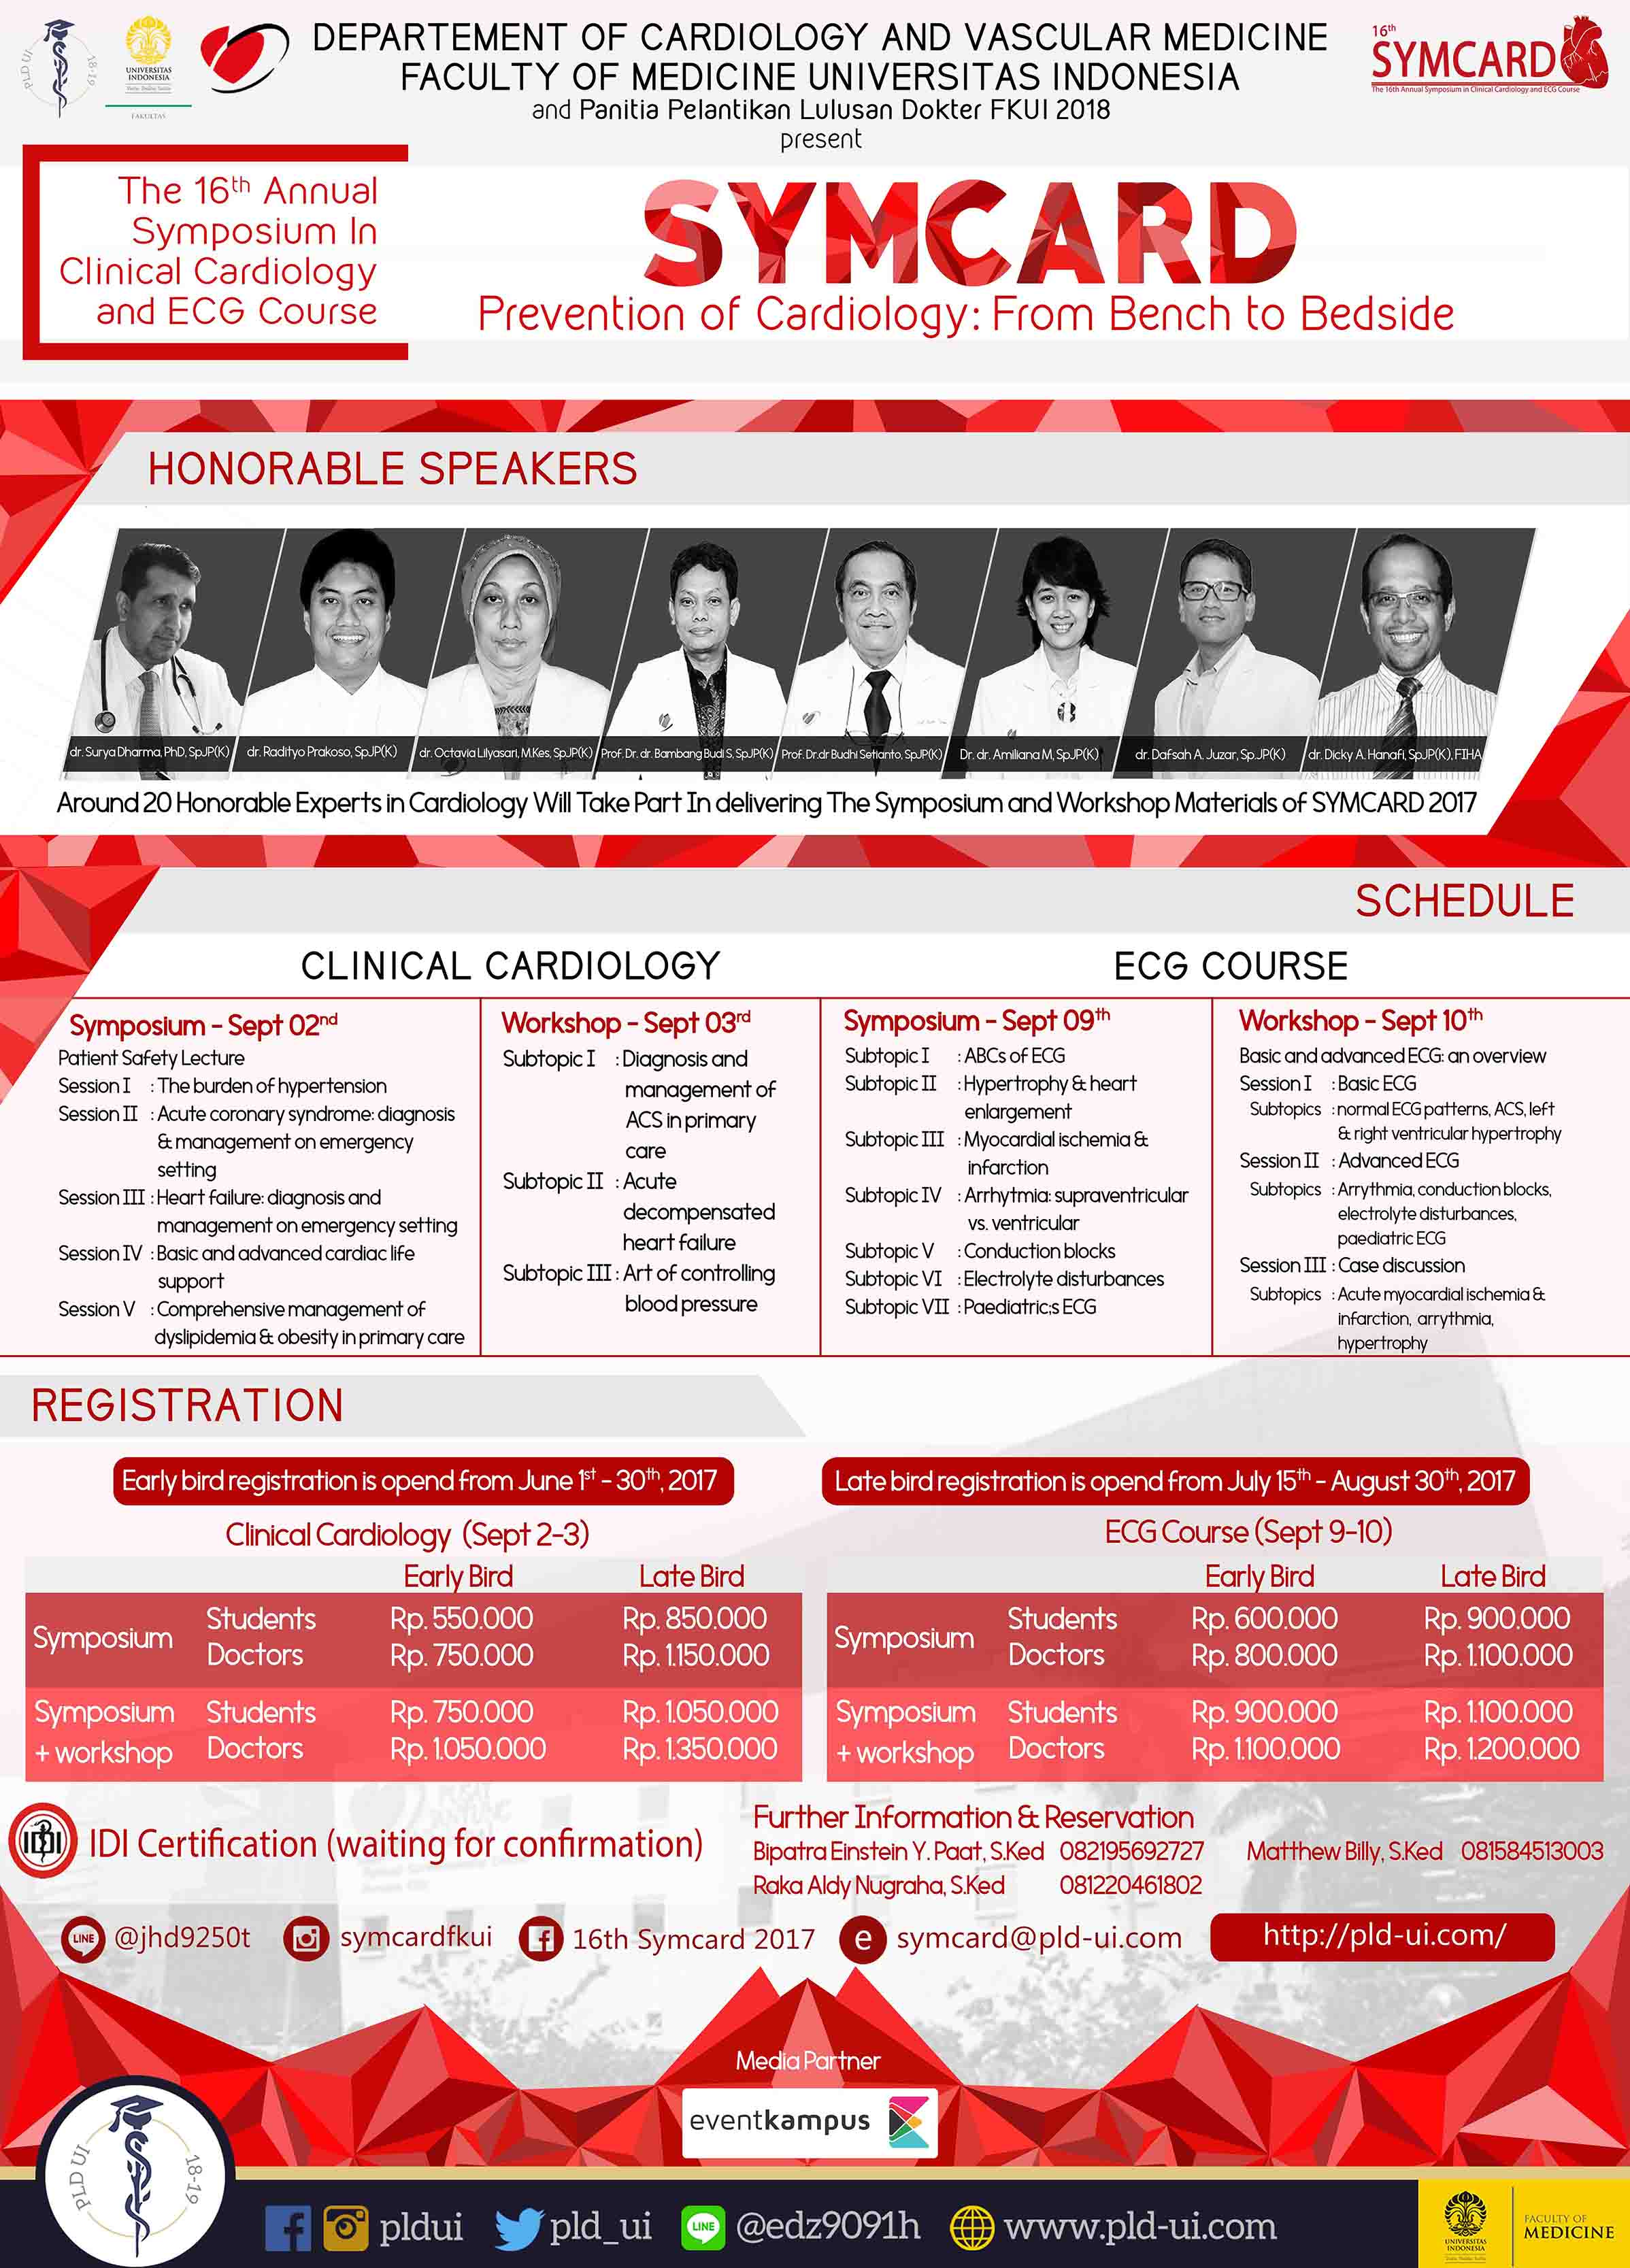 Poster The 16th Symposium in Clinical Cardiology and ECG Course (SYMCARD)